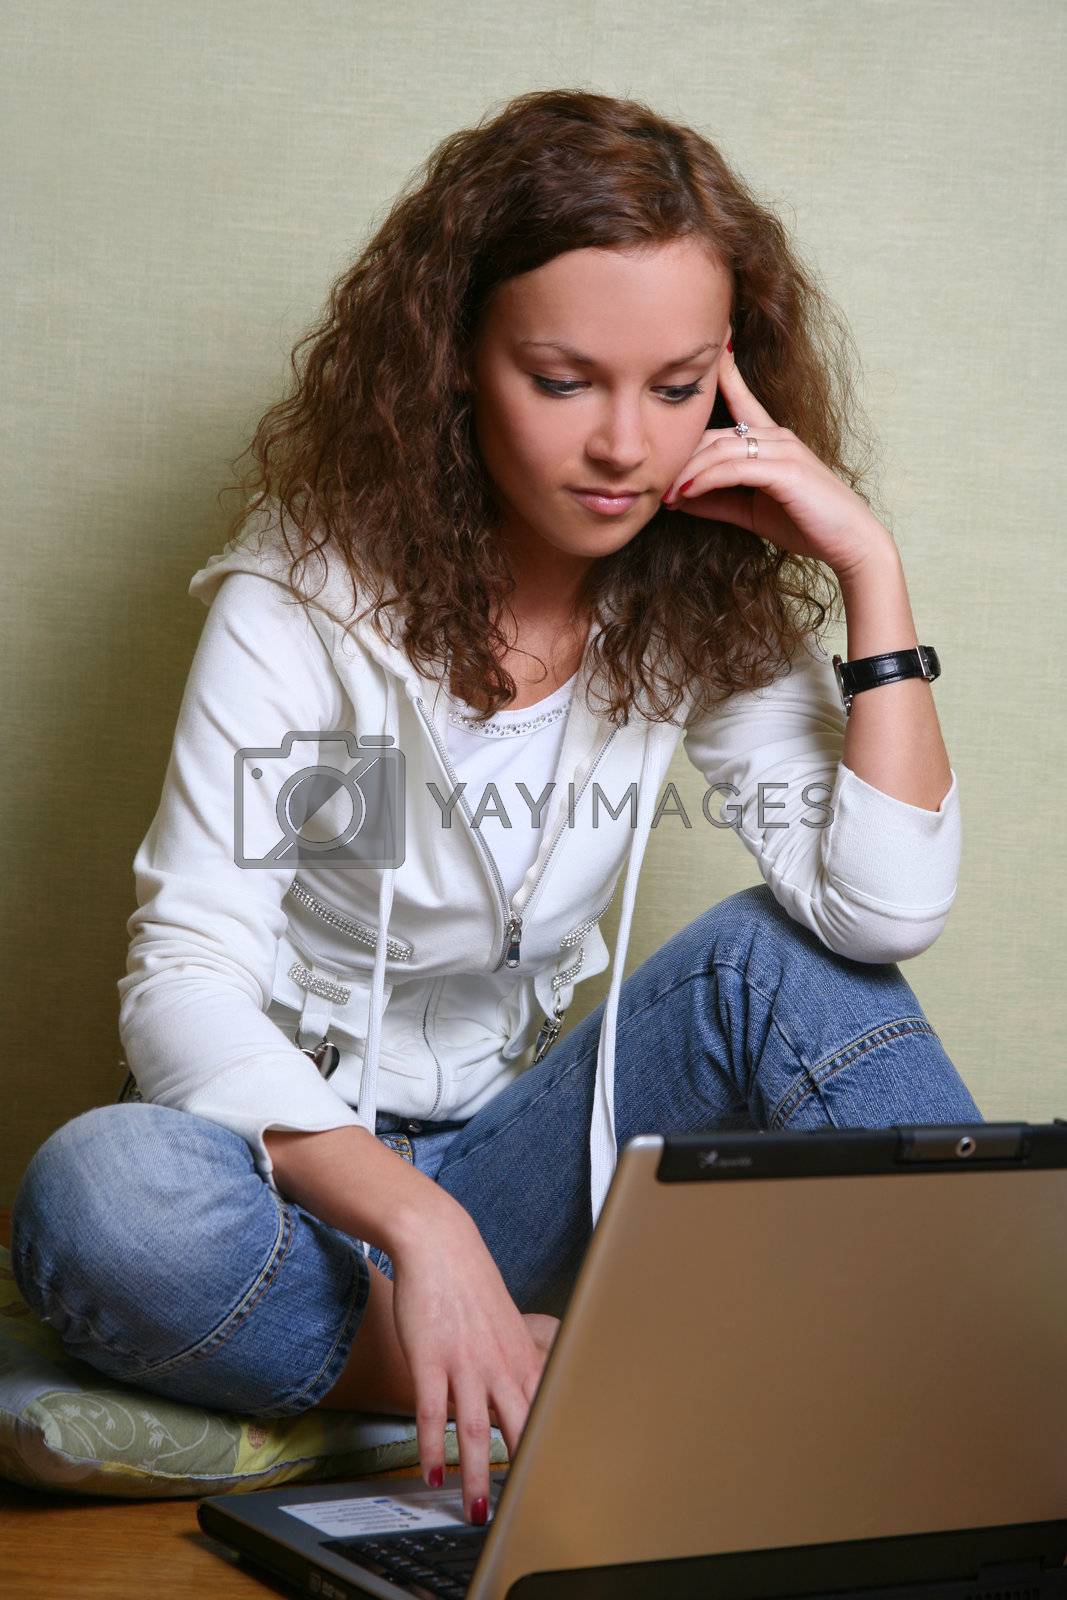 Royalty free image of Girl with a computer by friday